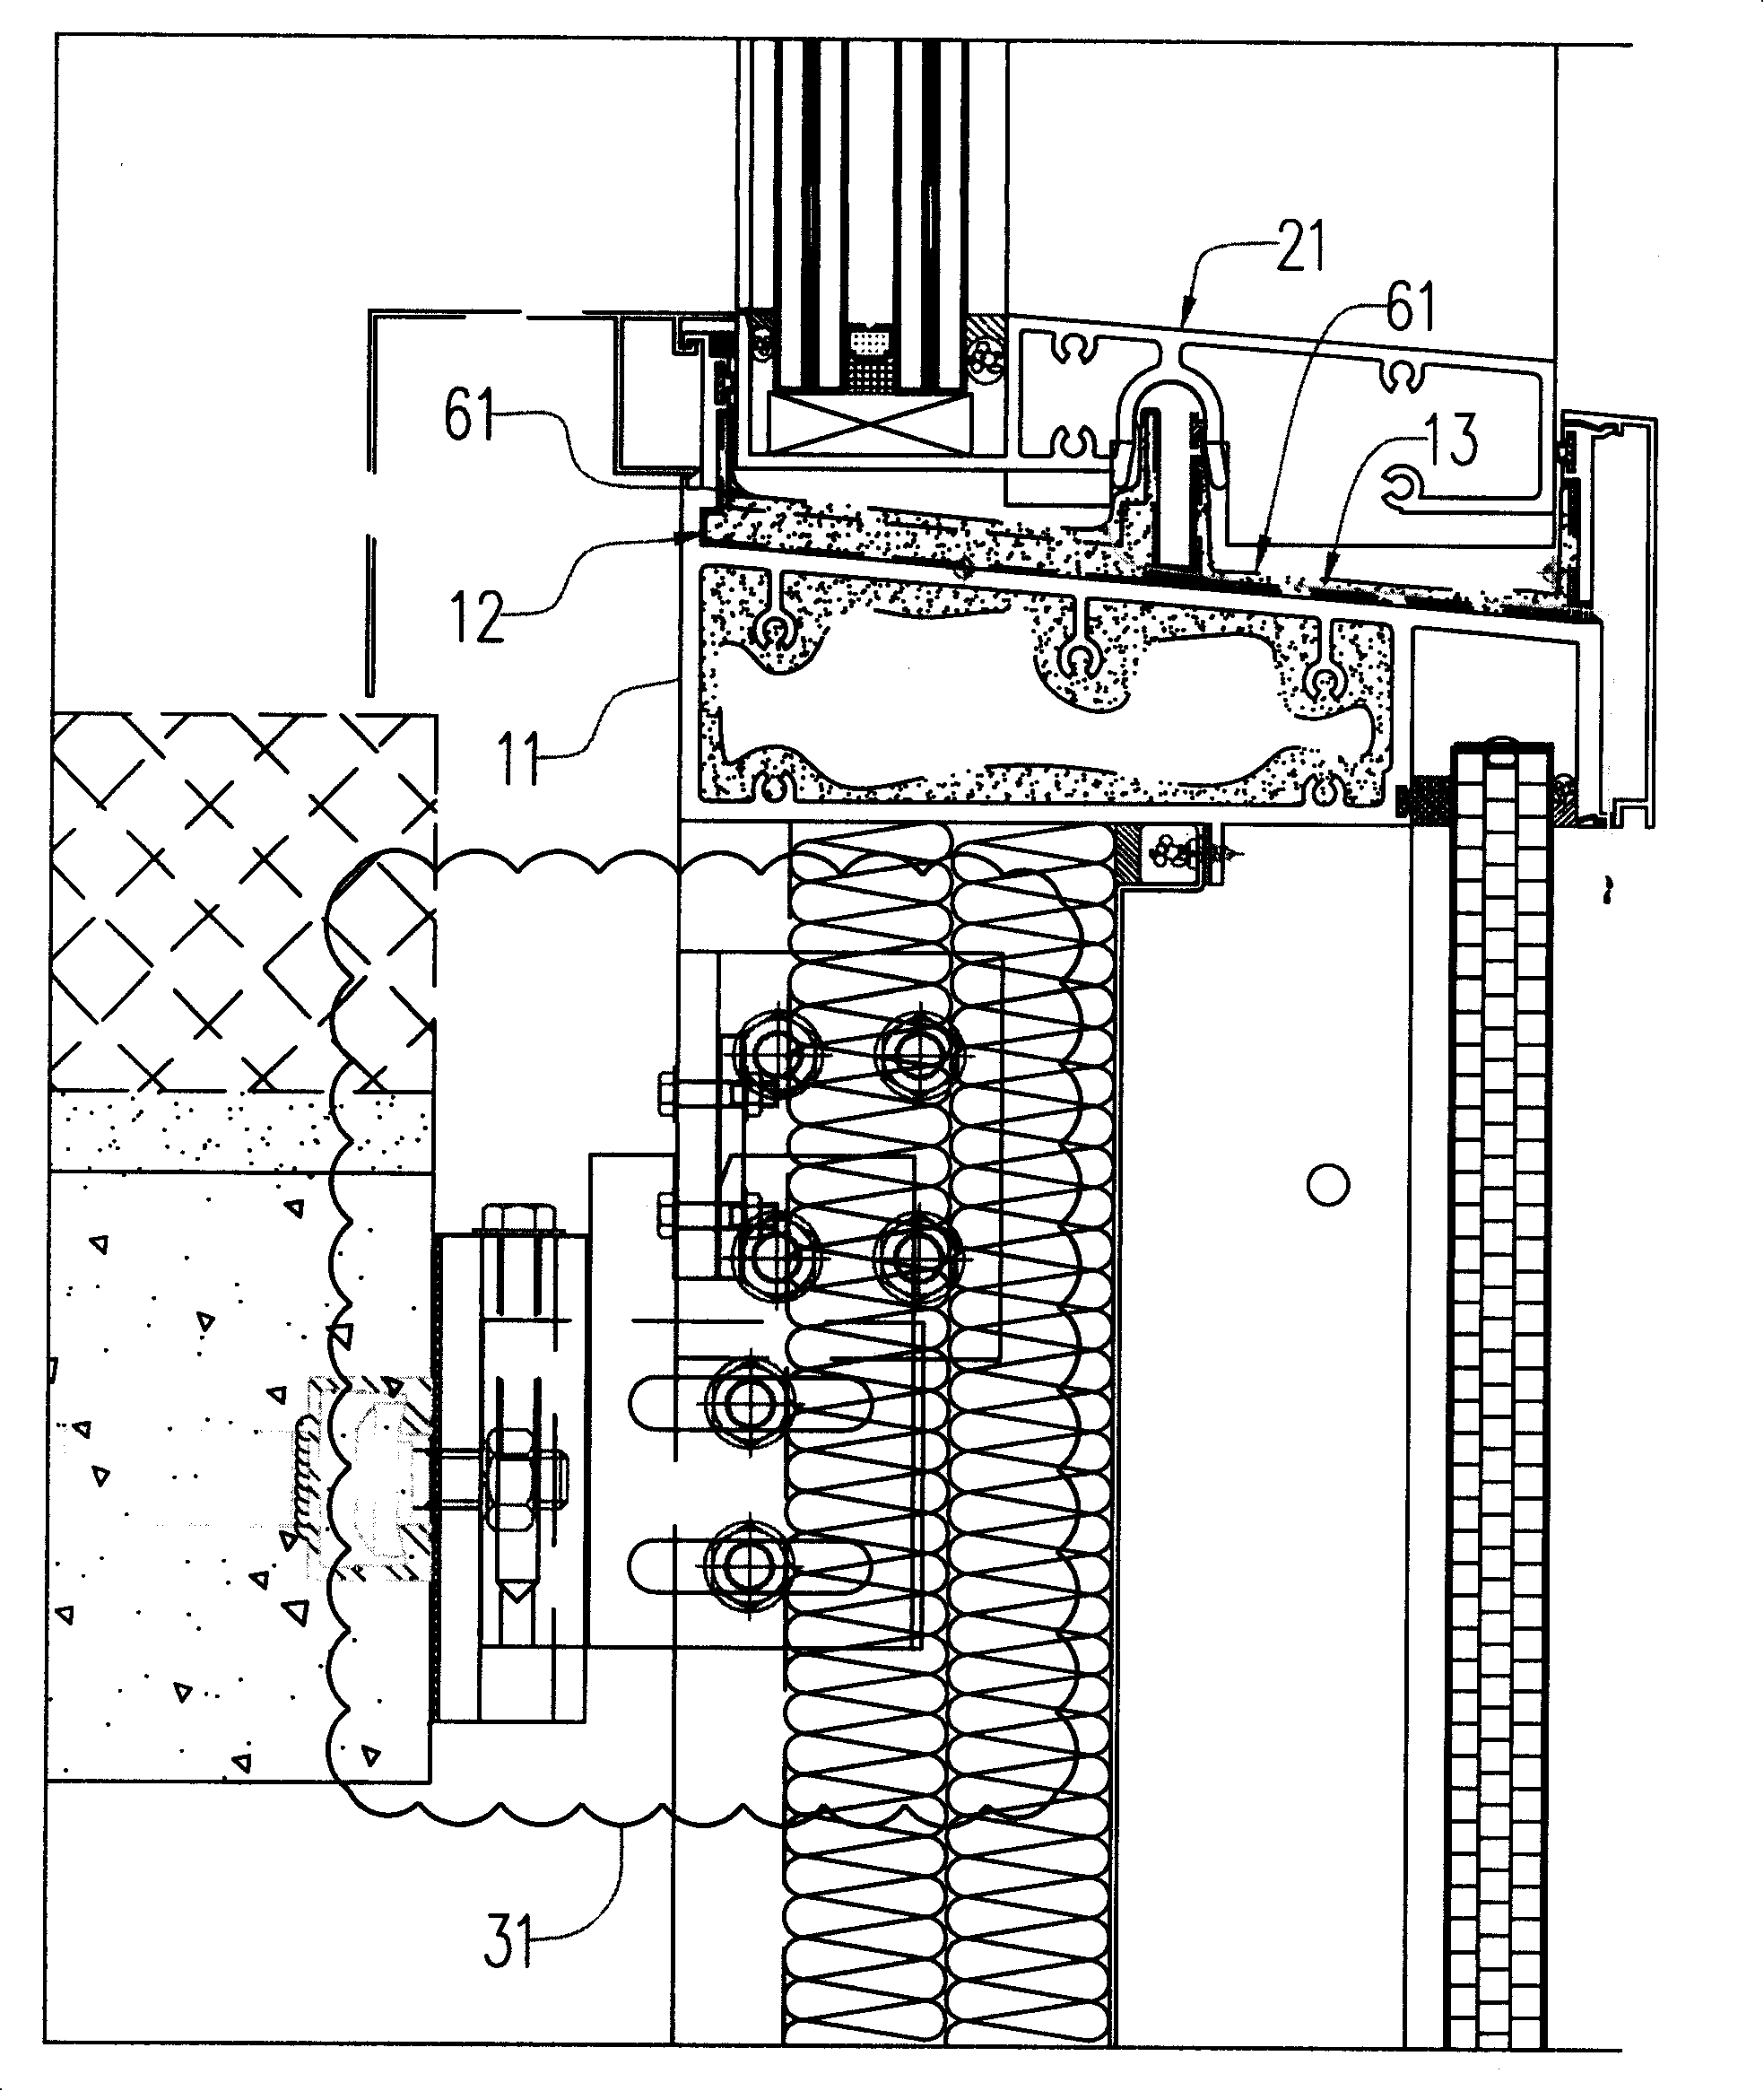 Method for connecting and installing unit curtain walls